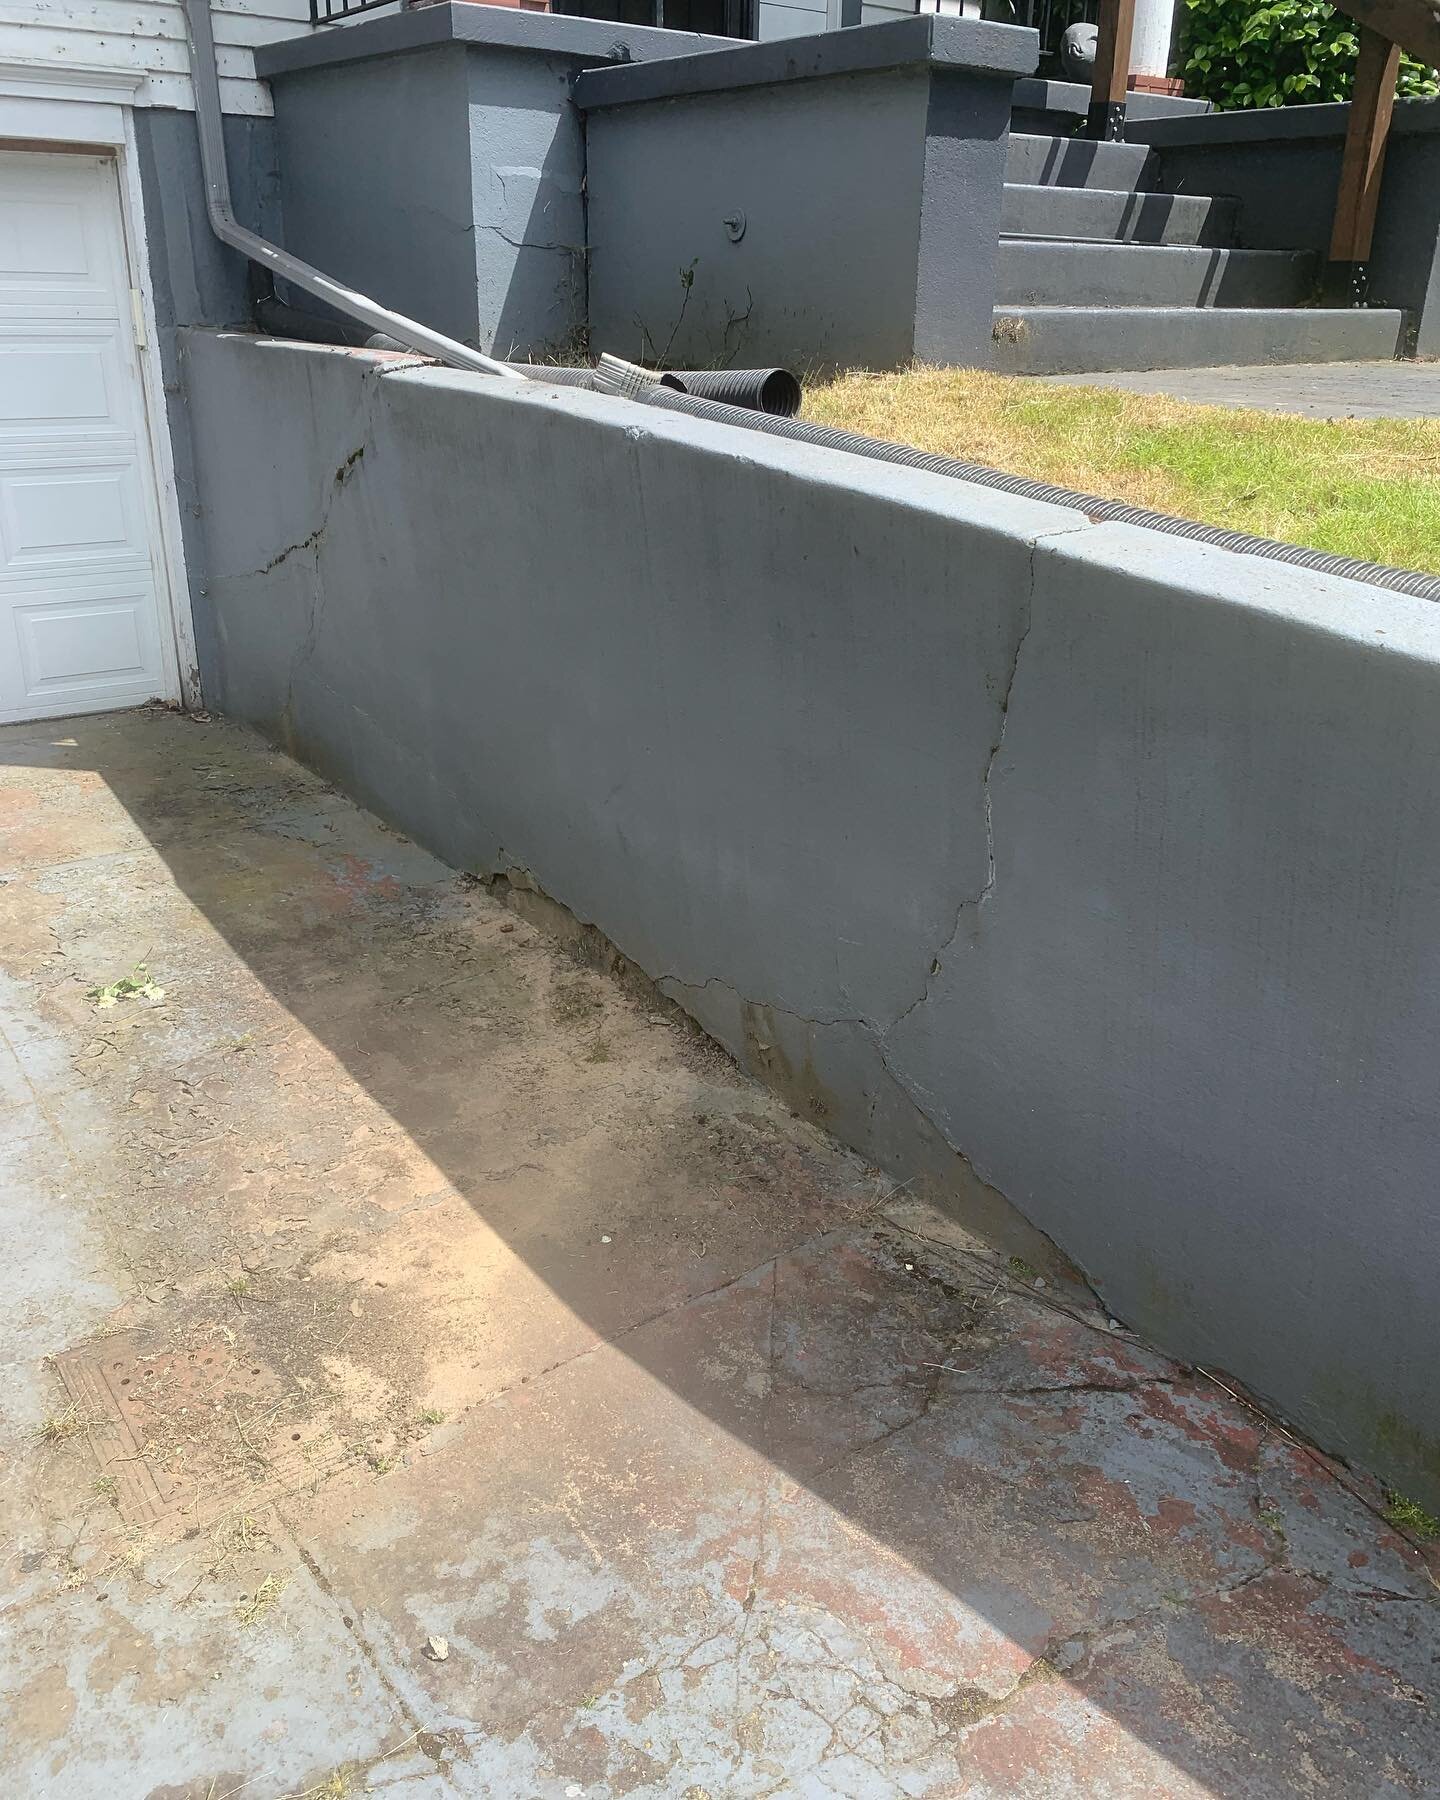 @griffinsconstruction just finished a big concrete job for one of our homeowners! 

Their driveway walls were starting to collapse inward and there was no rebar which had the homeowner fearful it was going to crumble in the near future.  Their future